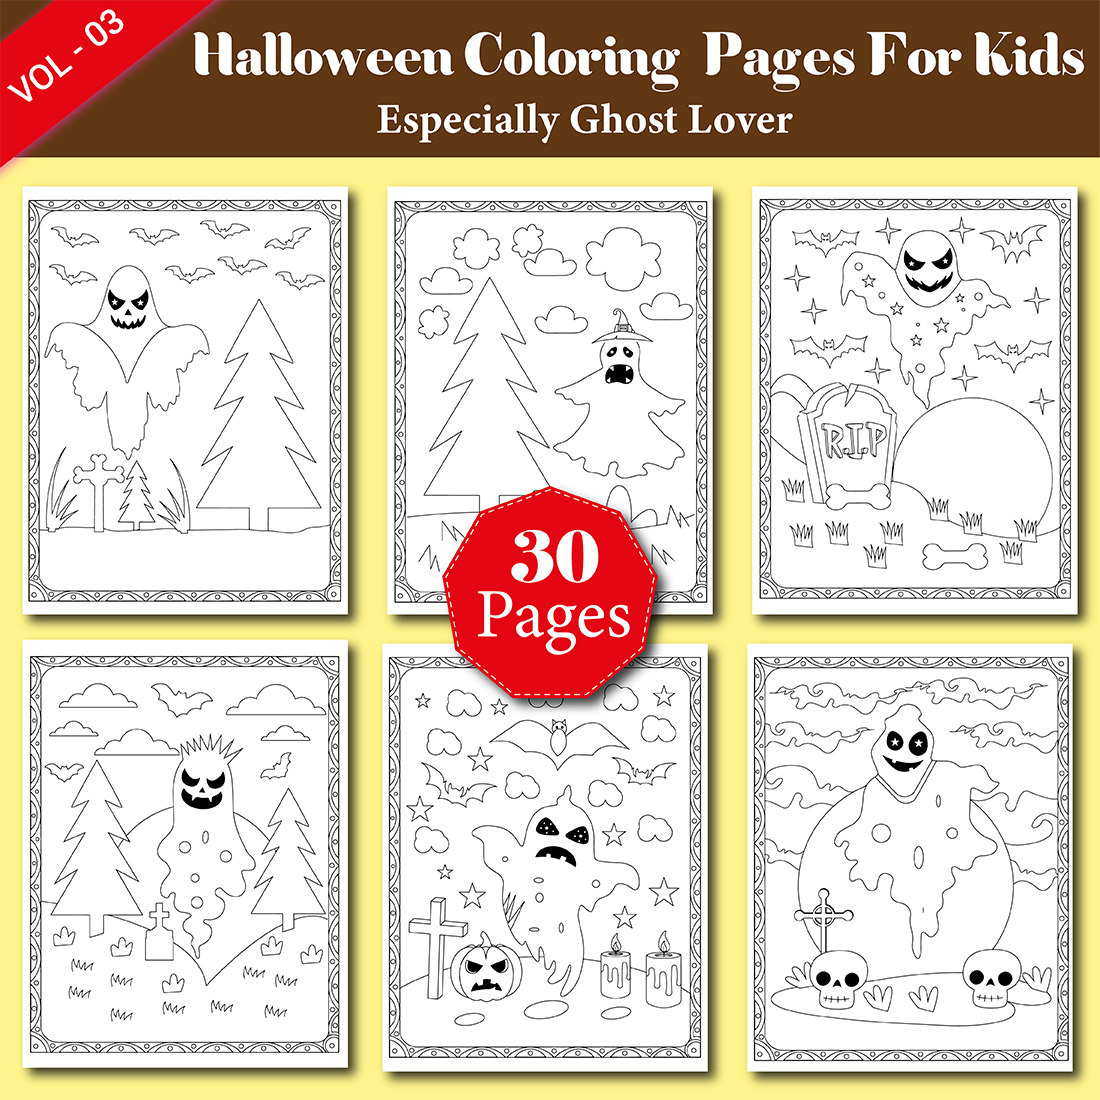 30 Pages Halloween Ghost Coloring Book cover image.